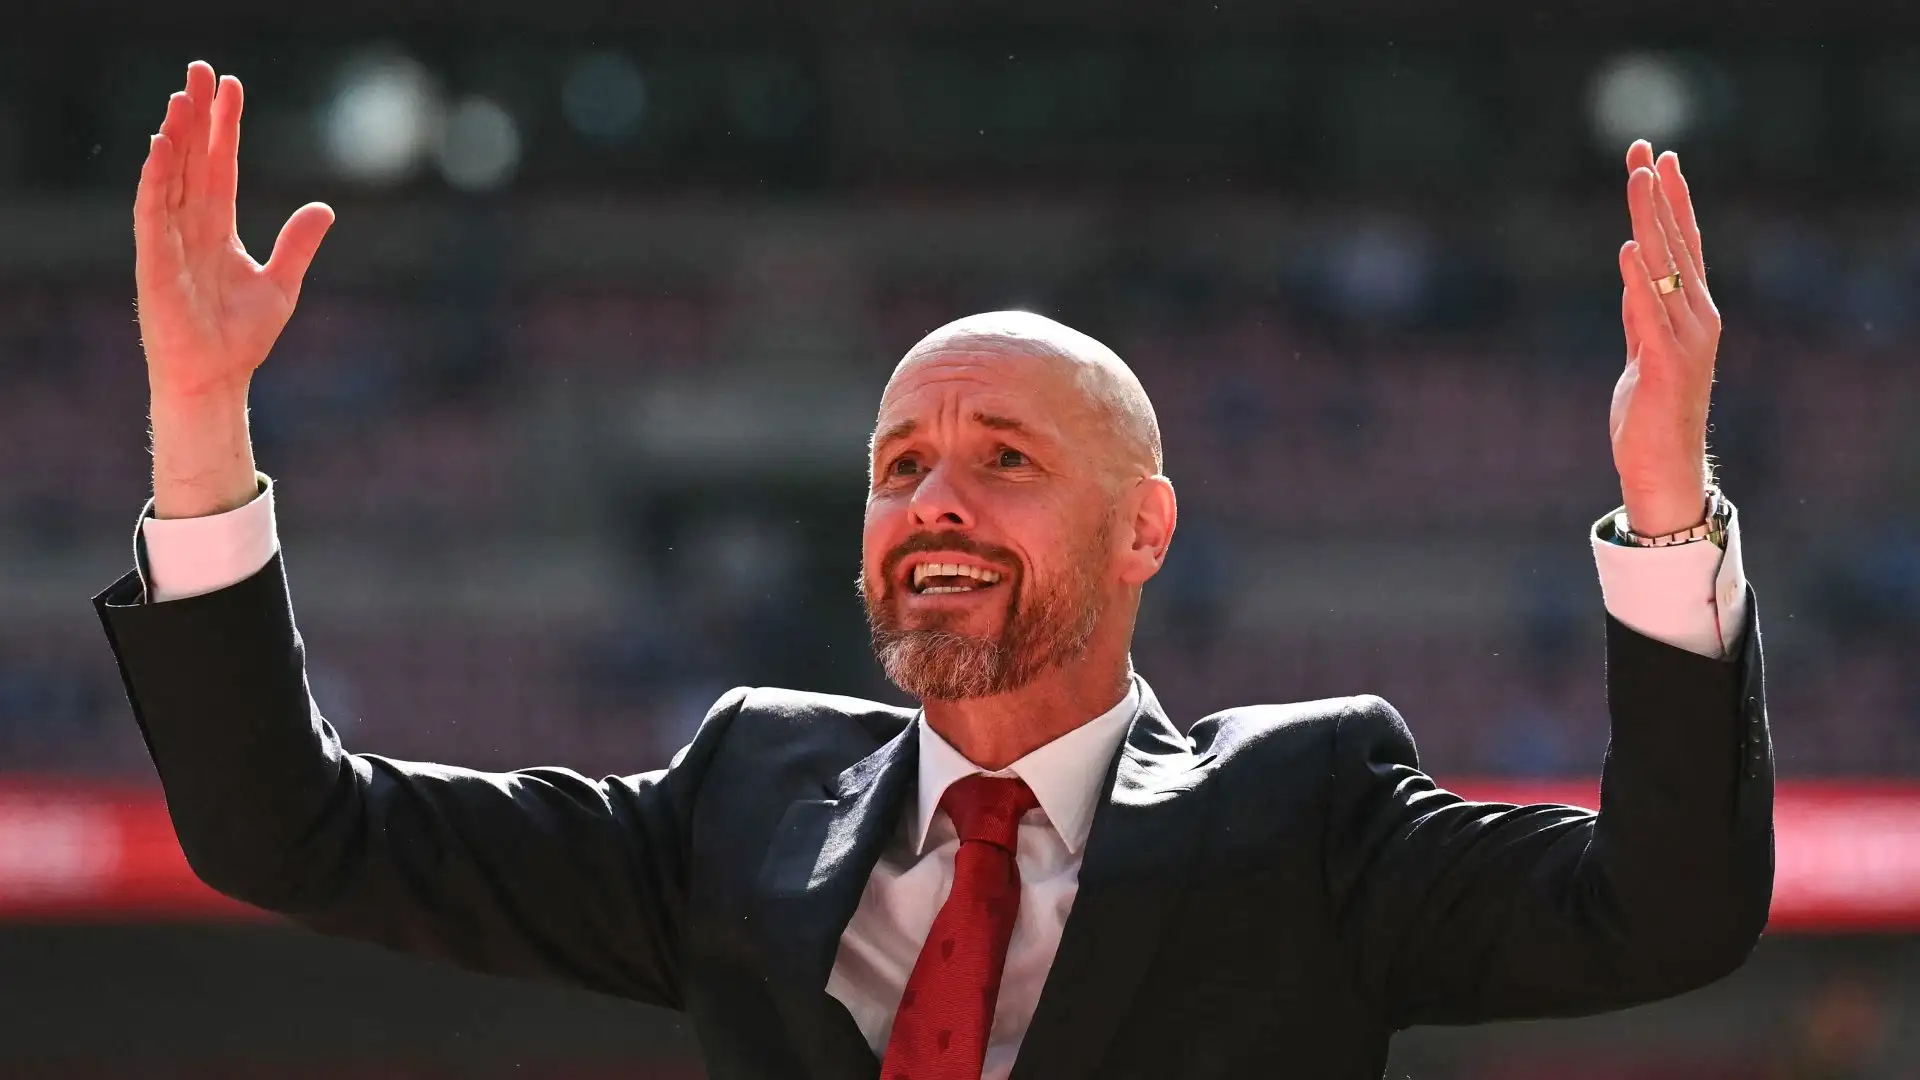 Revealed: Erik ten Hag demanding ‘swift’ decision on Man Utd position as FA Cup triumph complicates potential sack call from INEOS